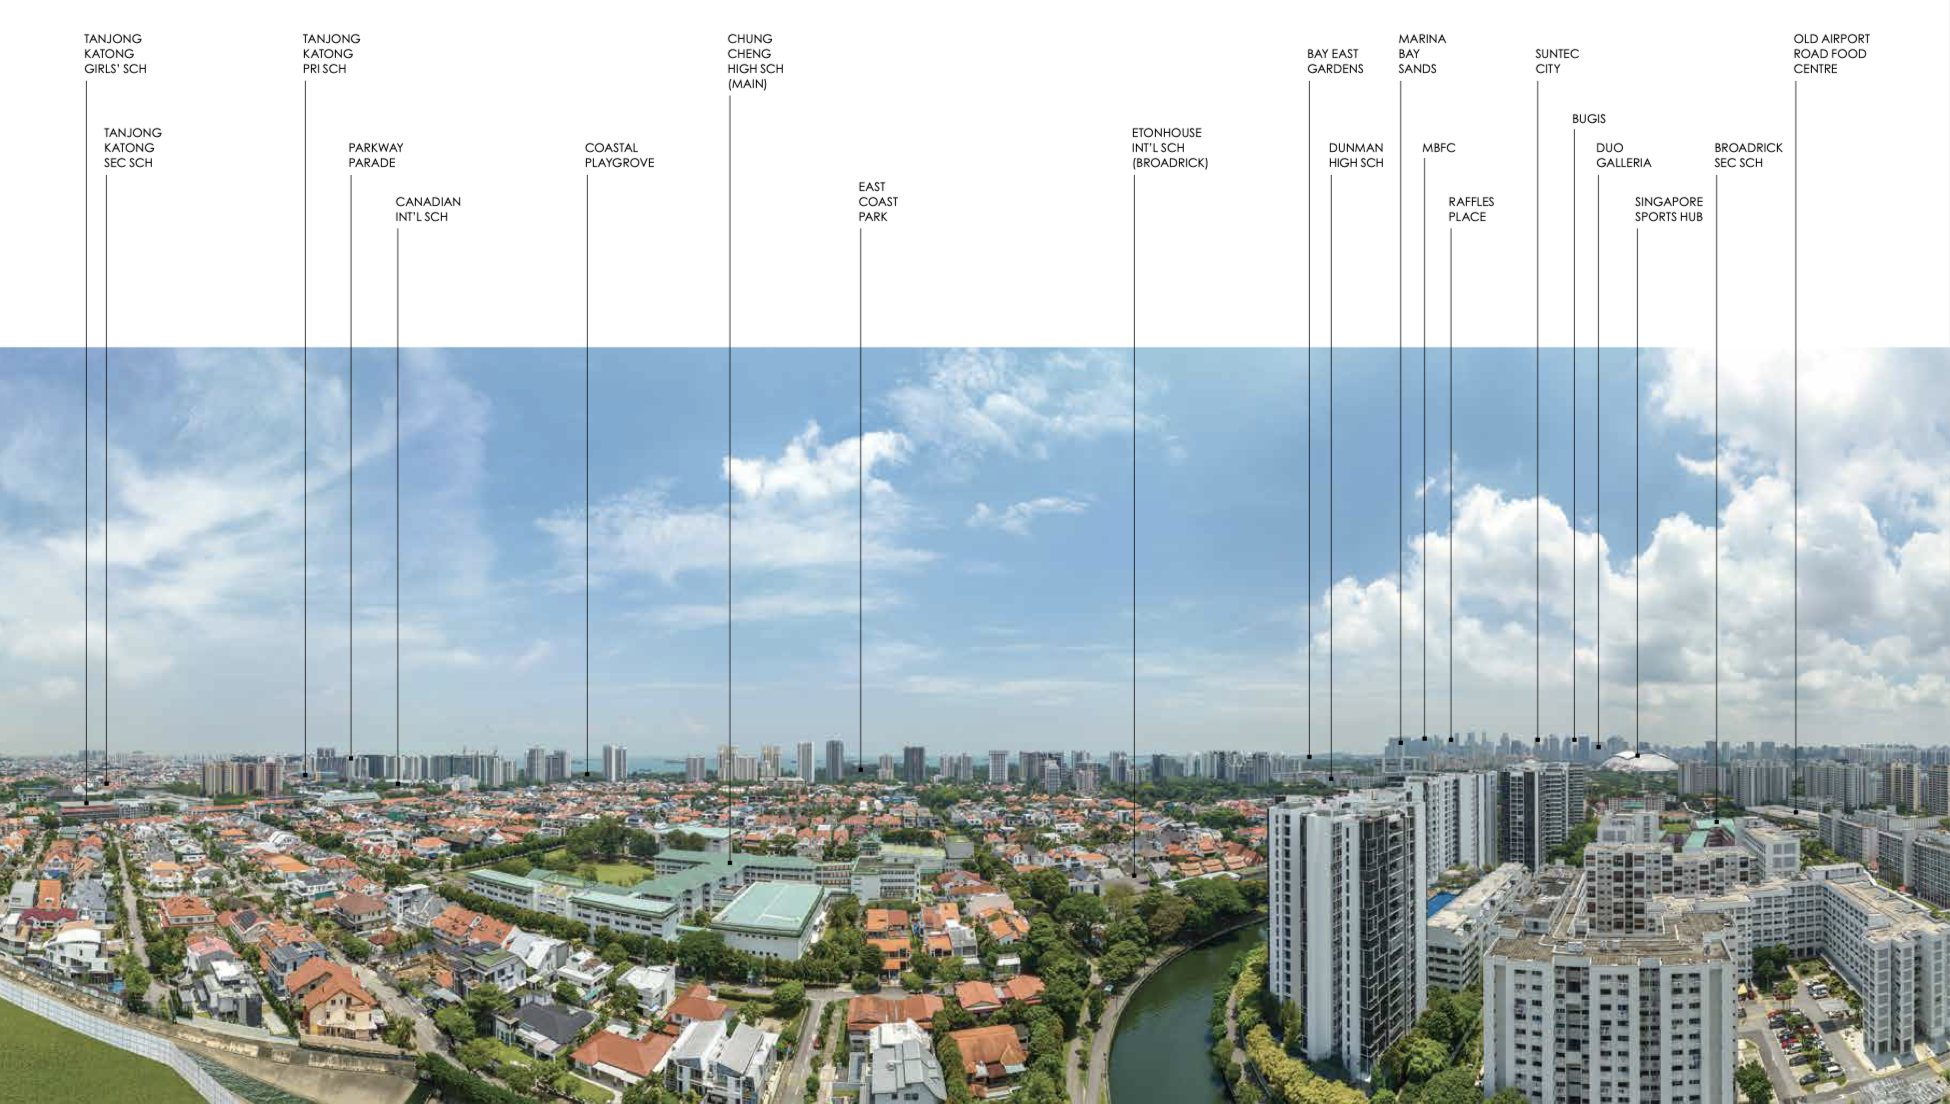 grand-dunman-overview